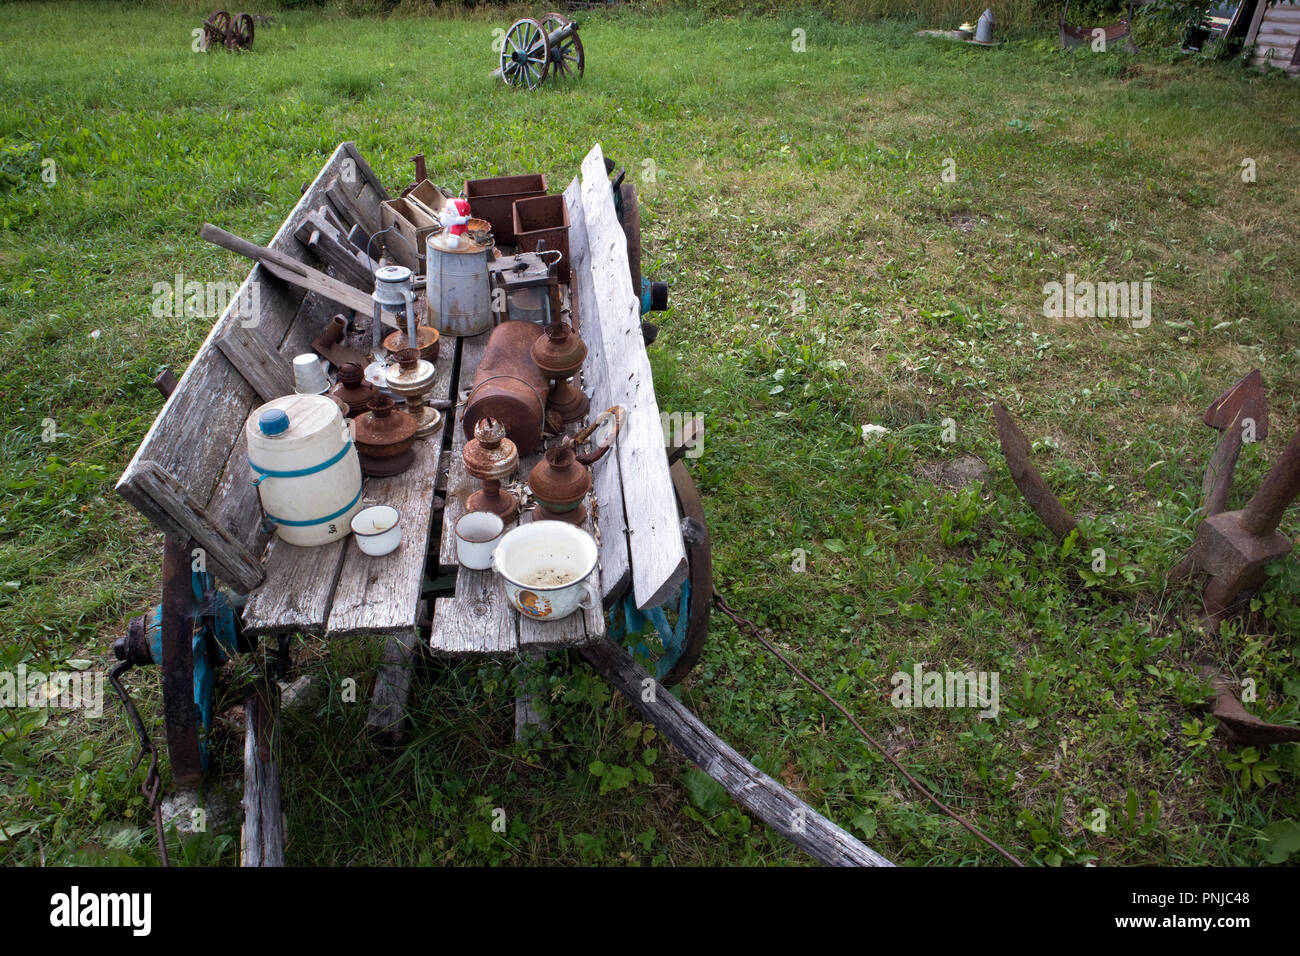 Open air museum of old unnecessary things, antique unwanted junk in old open sleigh Stock Photo